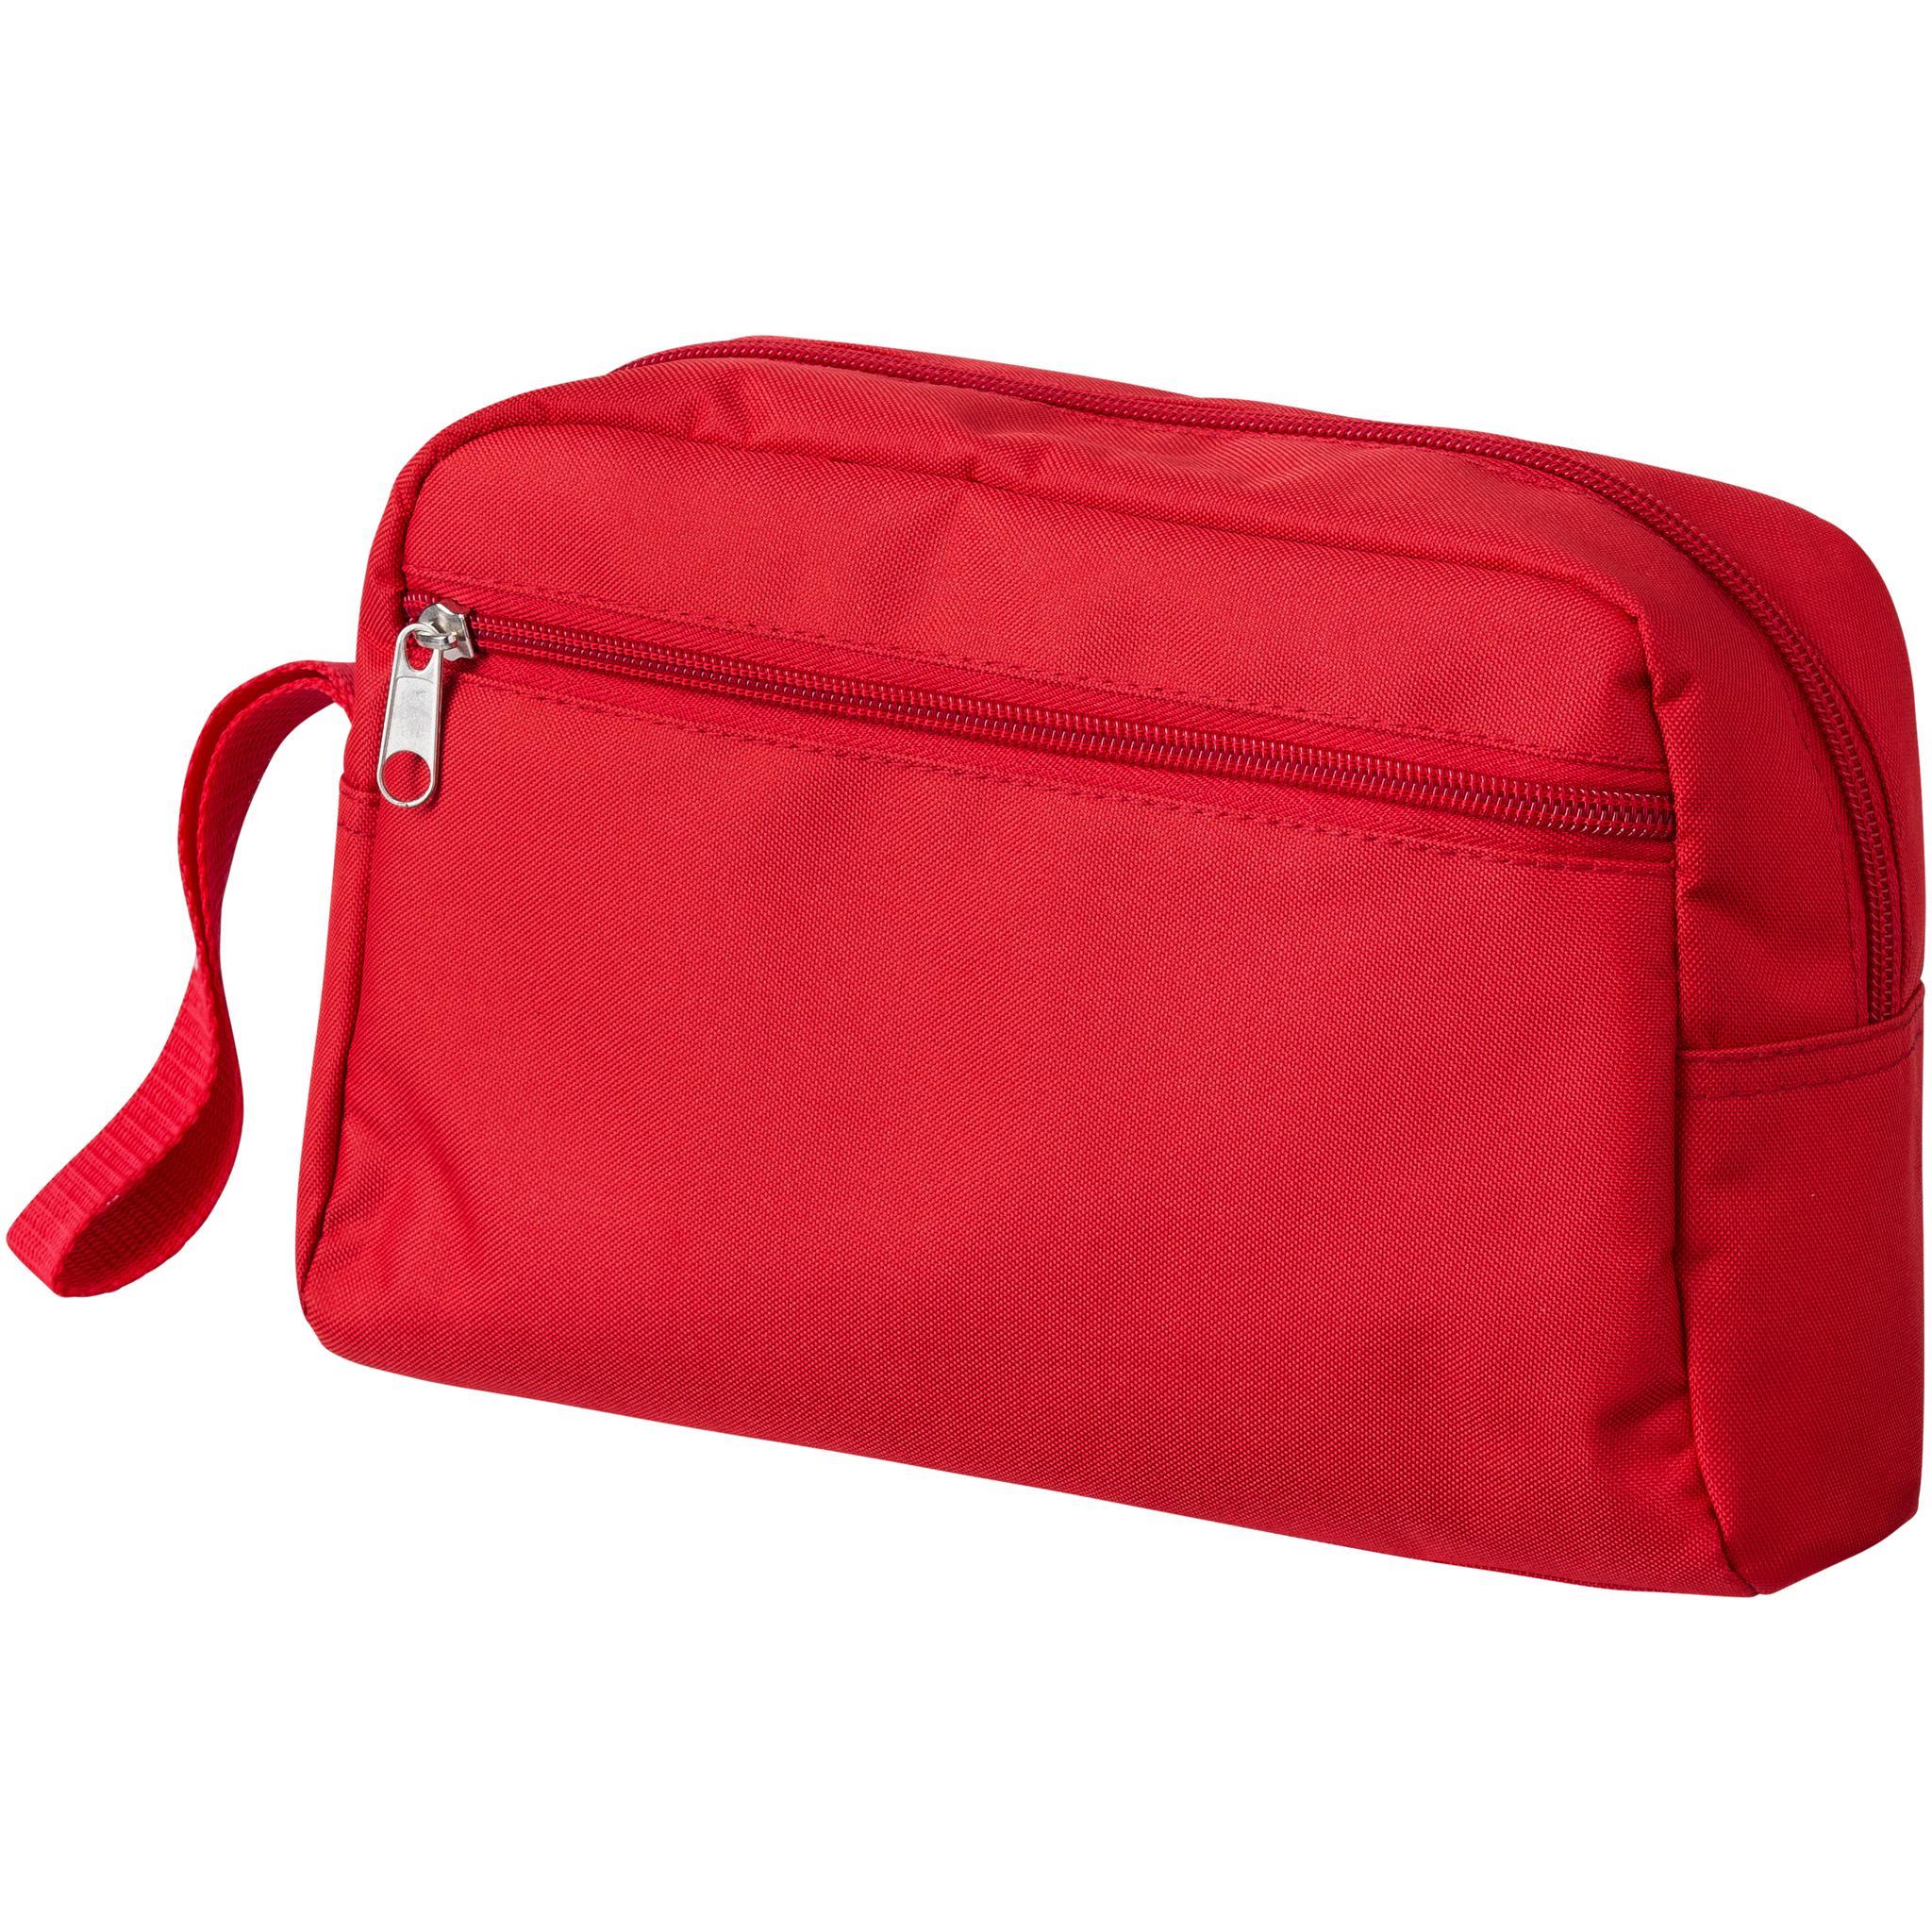 Bullet Transit Toiletry Bag (Pack of 2) (Red) (24 x 5.5 x 16 cm)